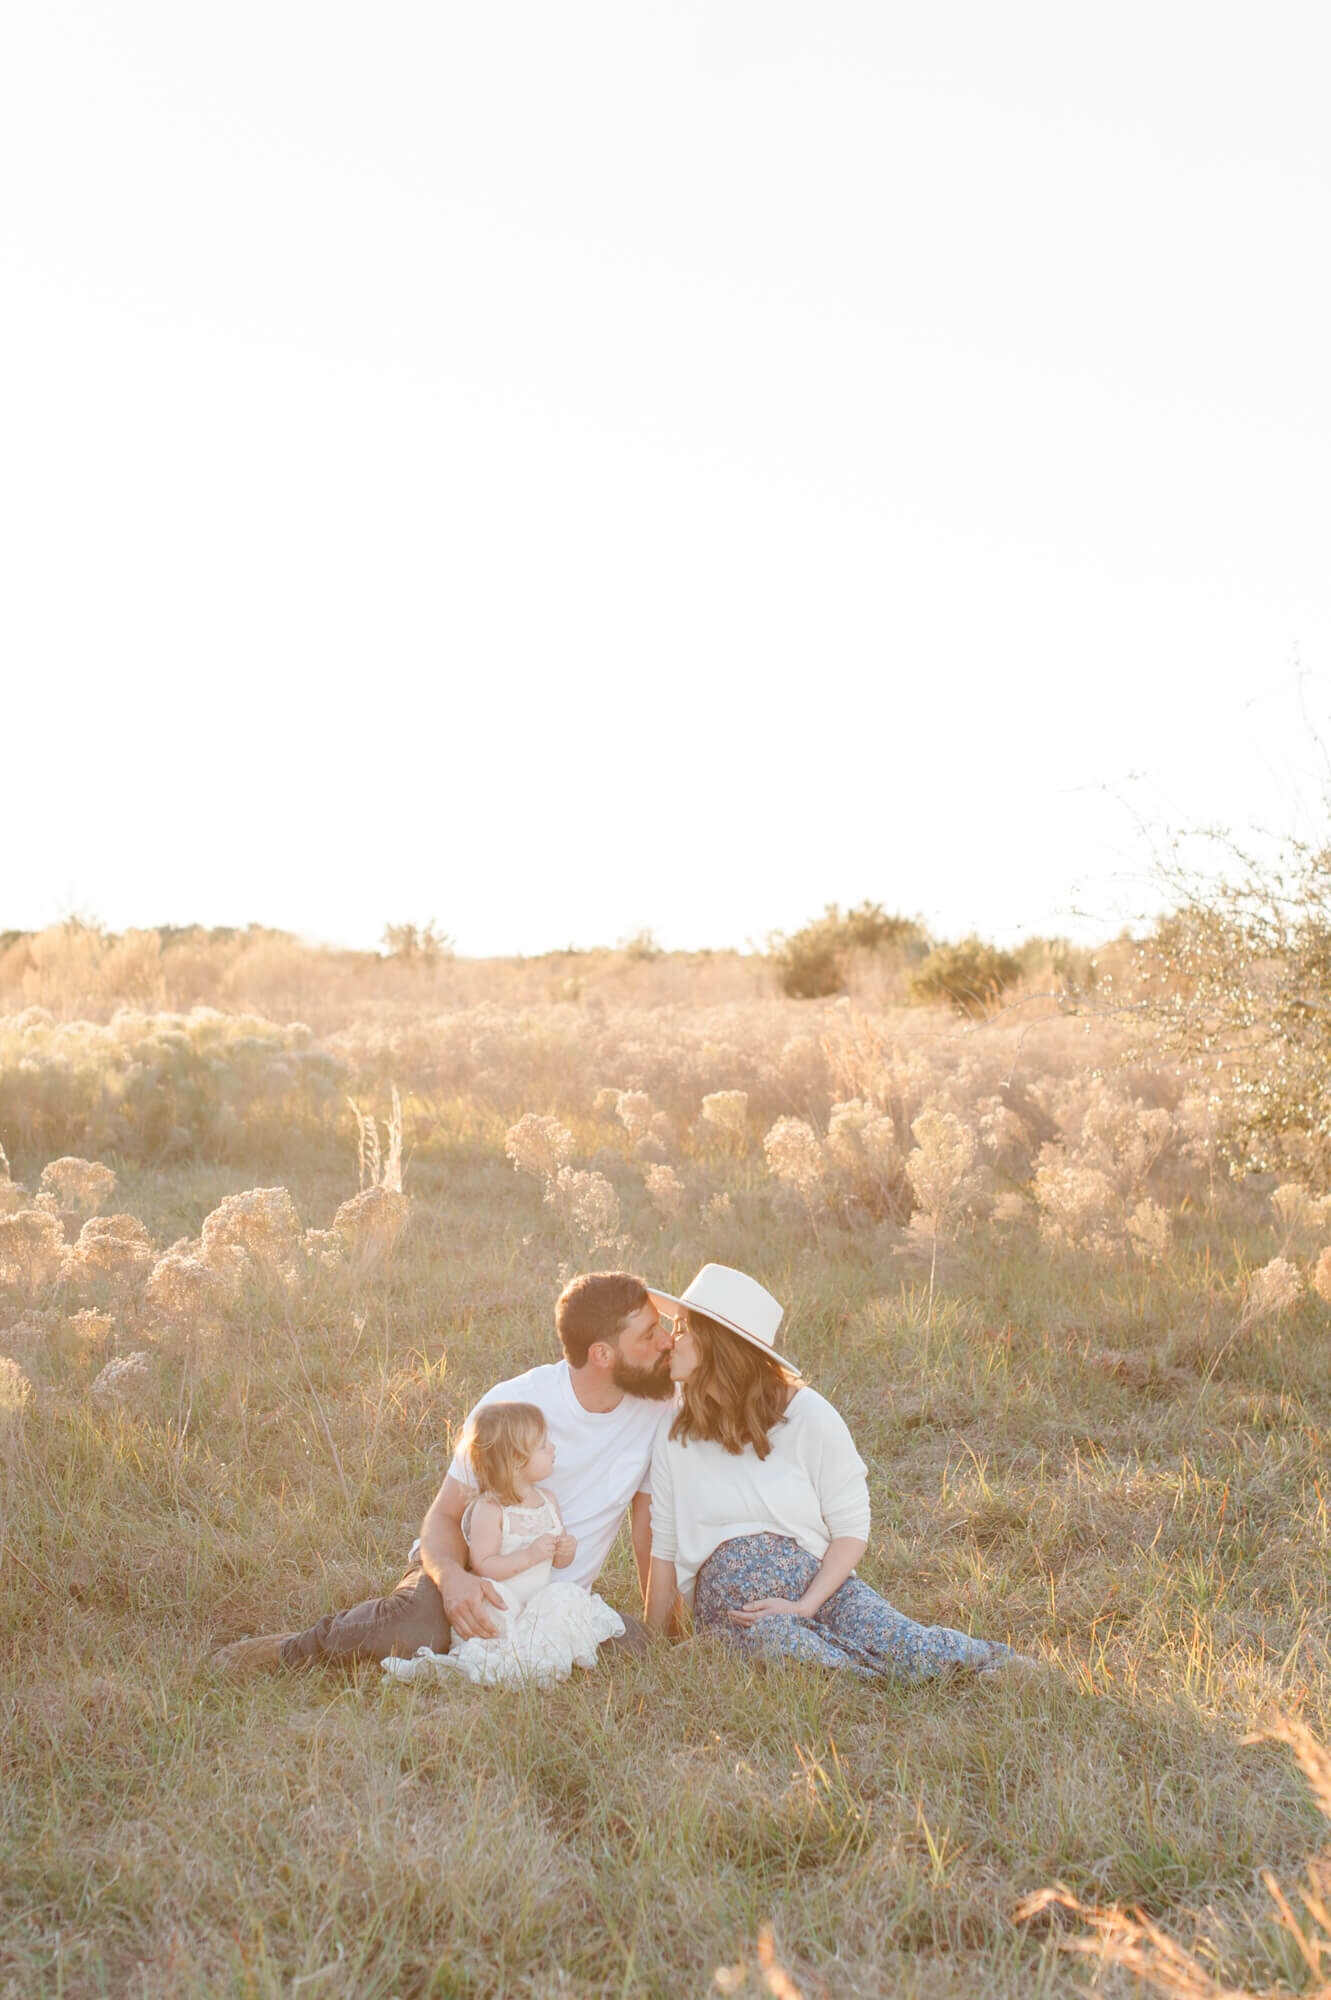 Pregnant mother sits in a field kissing her husband while holding their daughter in a tall grass field